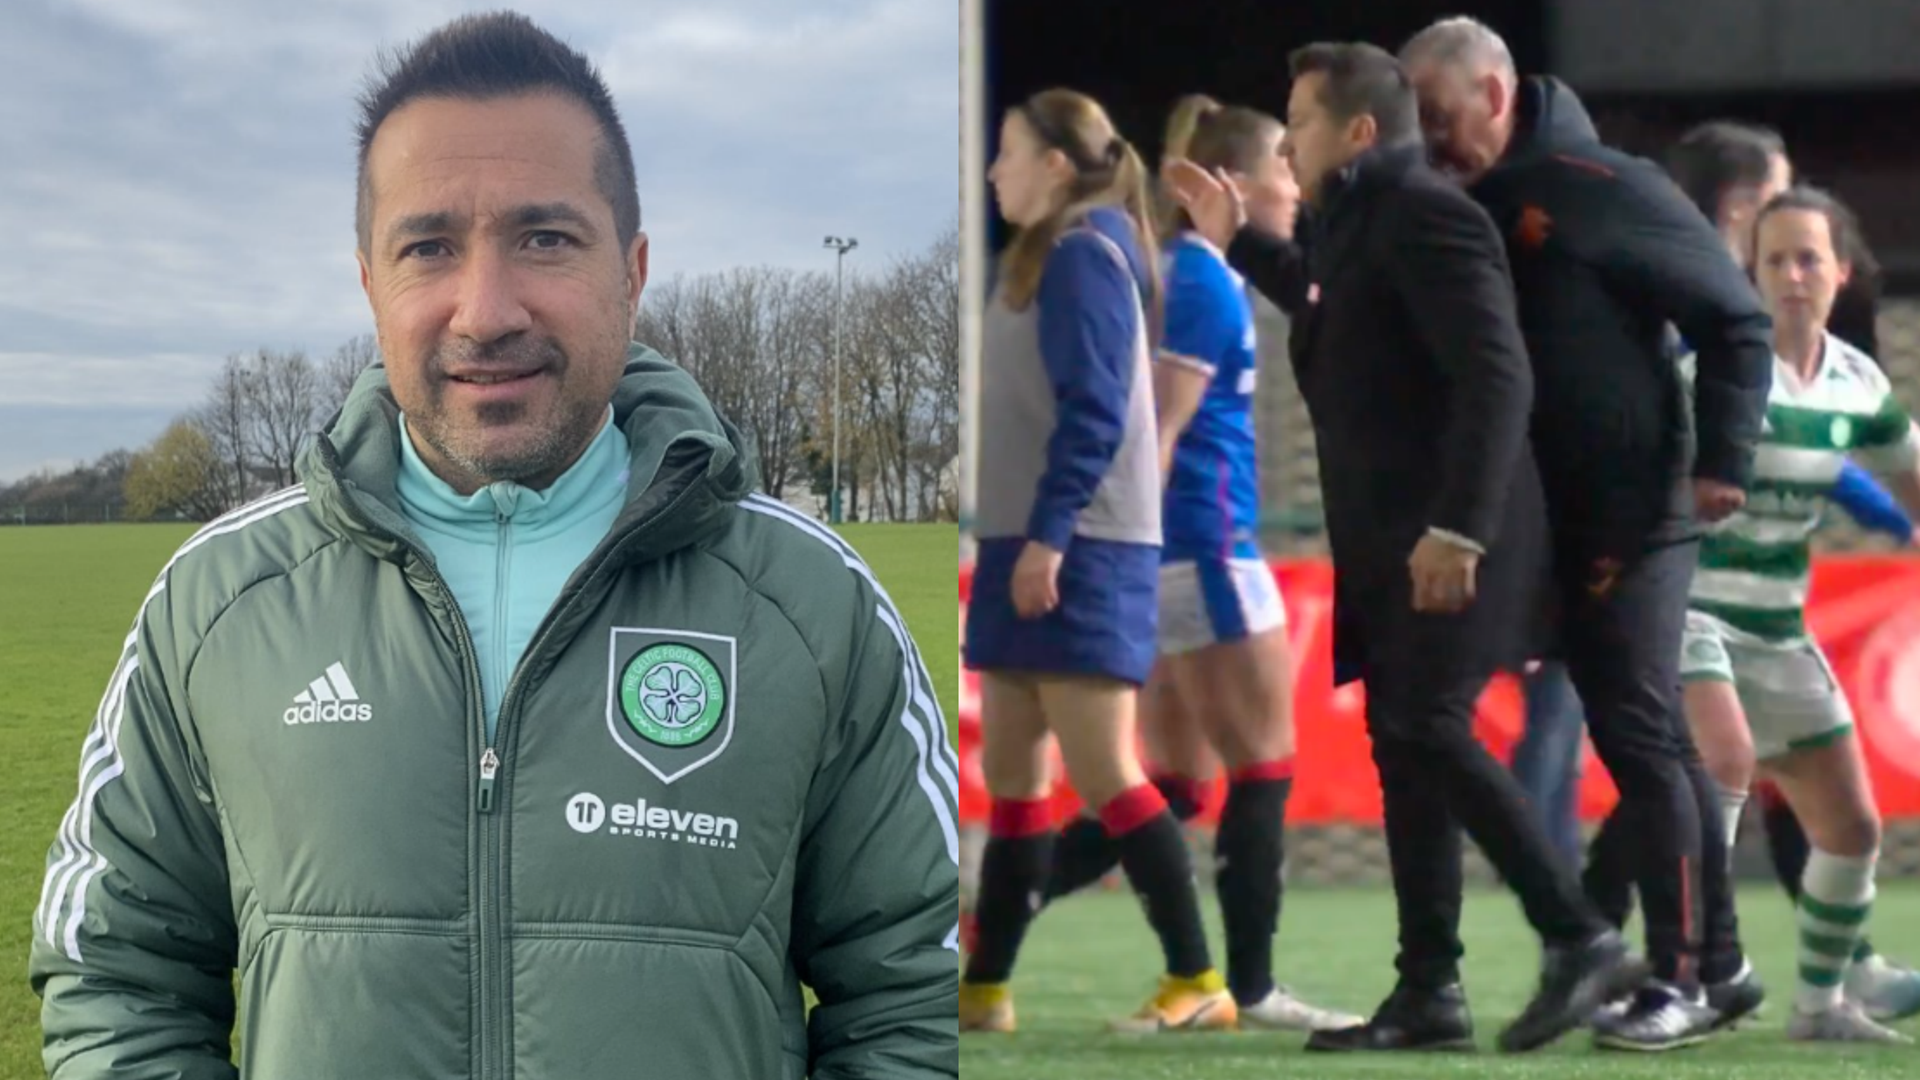 WATCH: Celtic boss Fran Alonso headbutted by Rangers rival Craig McPherson after dramatic Old Firm Women’s derby